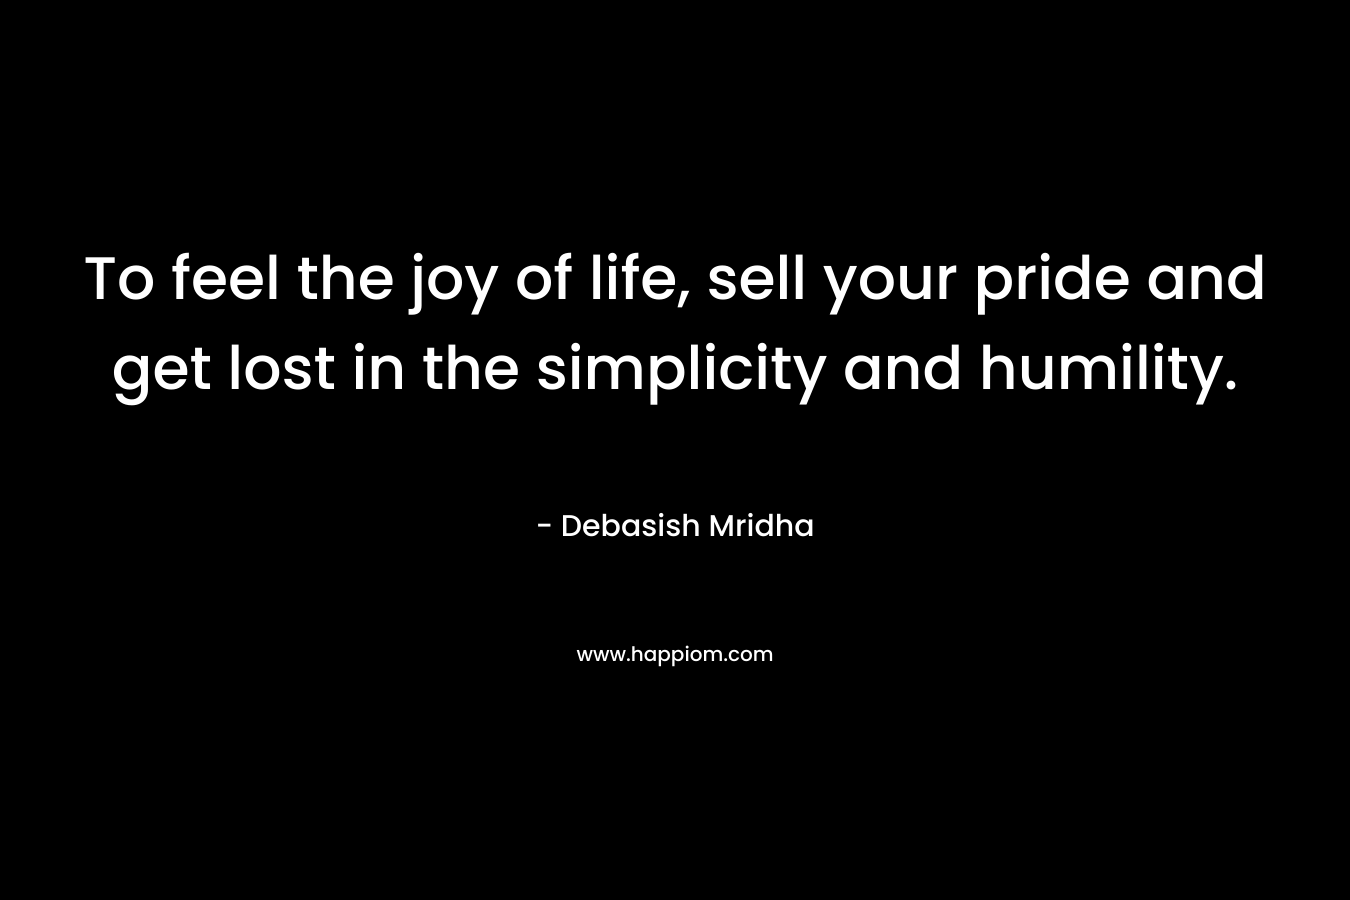 To feel the joy of life, sell your pride and get lost in the simplicity and humility.